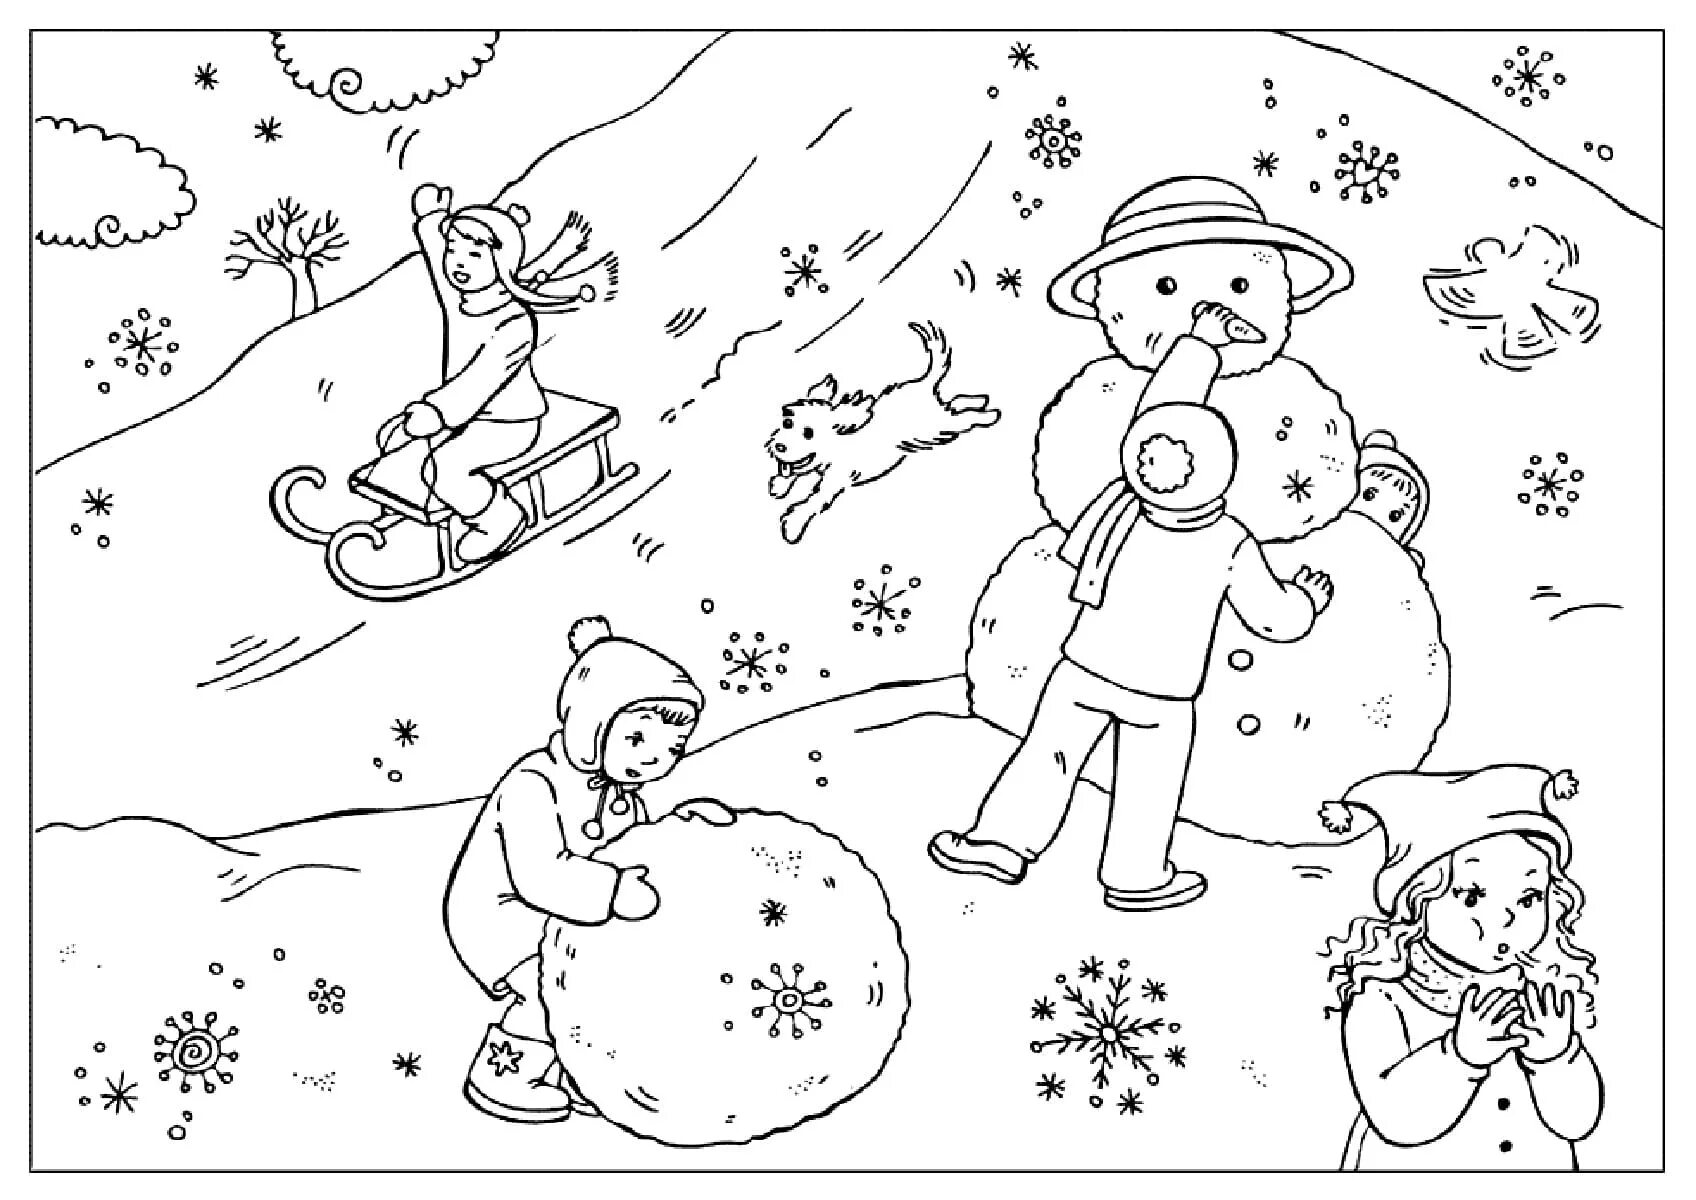 Winter pictures for kids #2